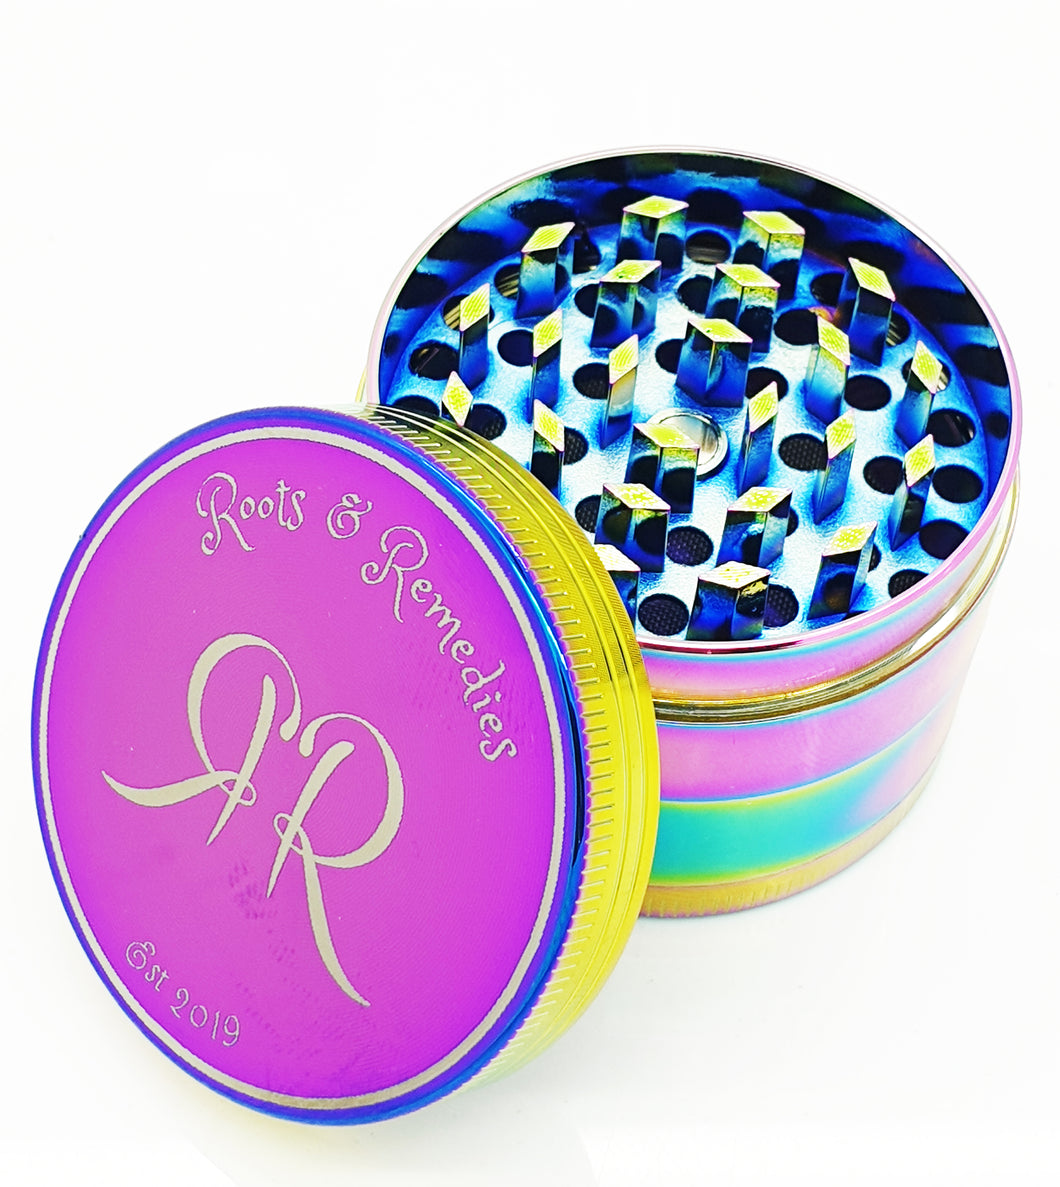 Custom Engraved Iridescent 50mm 4 Part Herb Grinder -With Your Logo/image/text